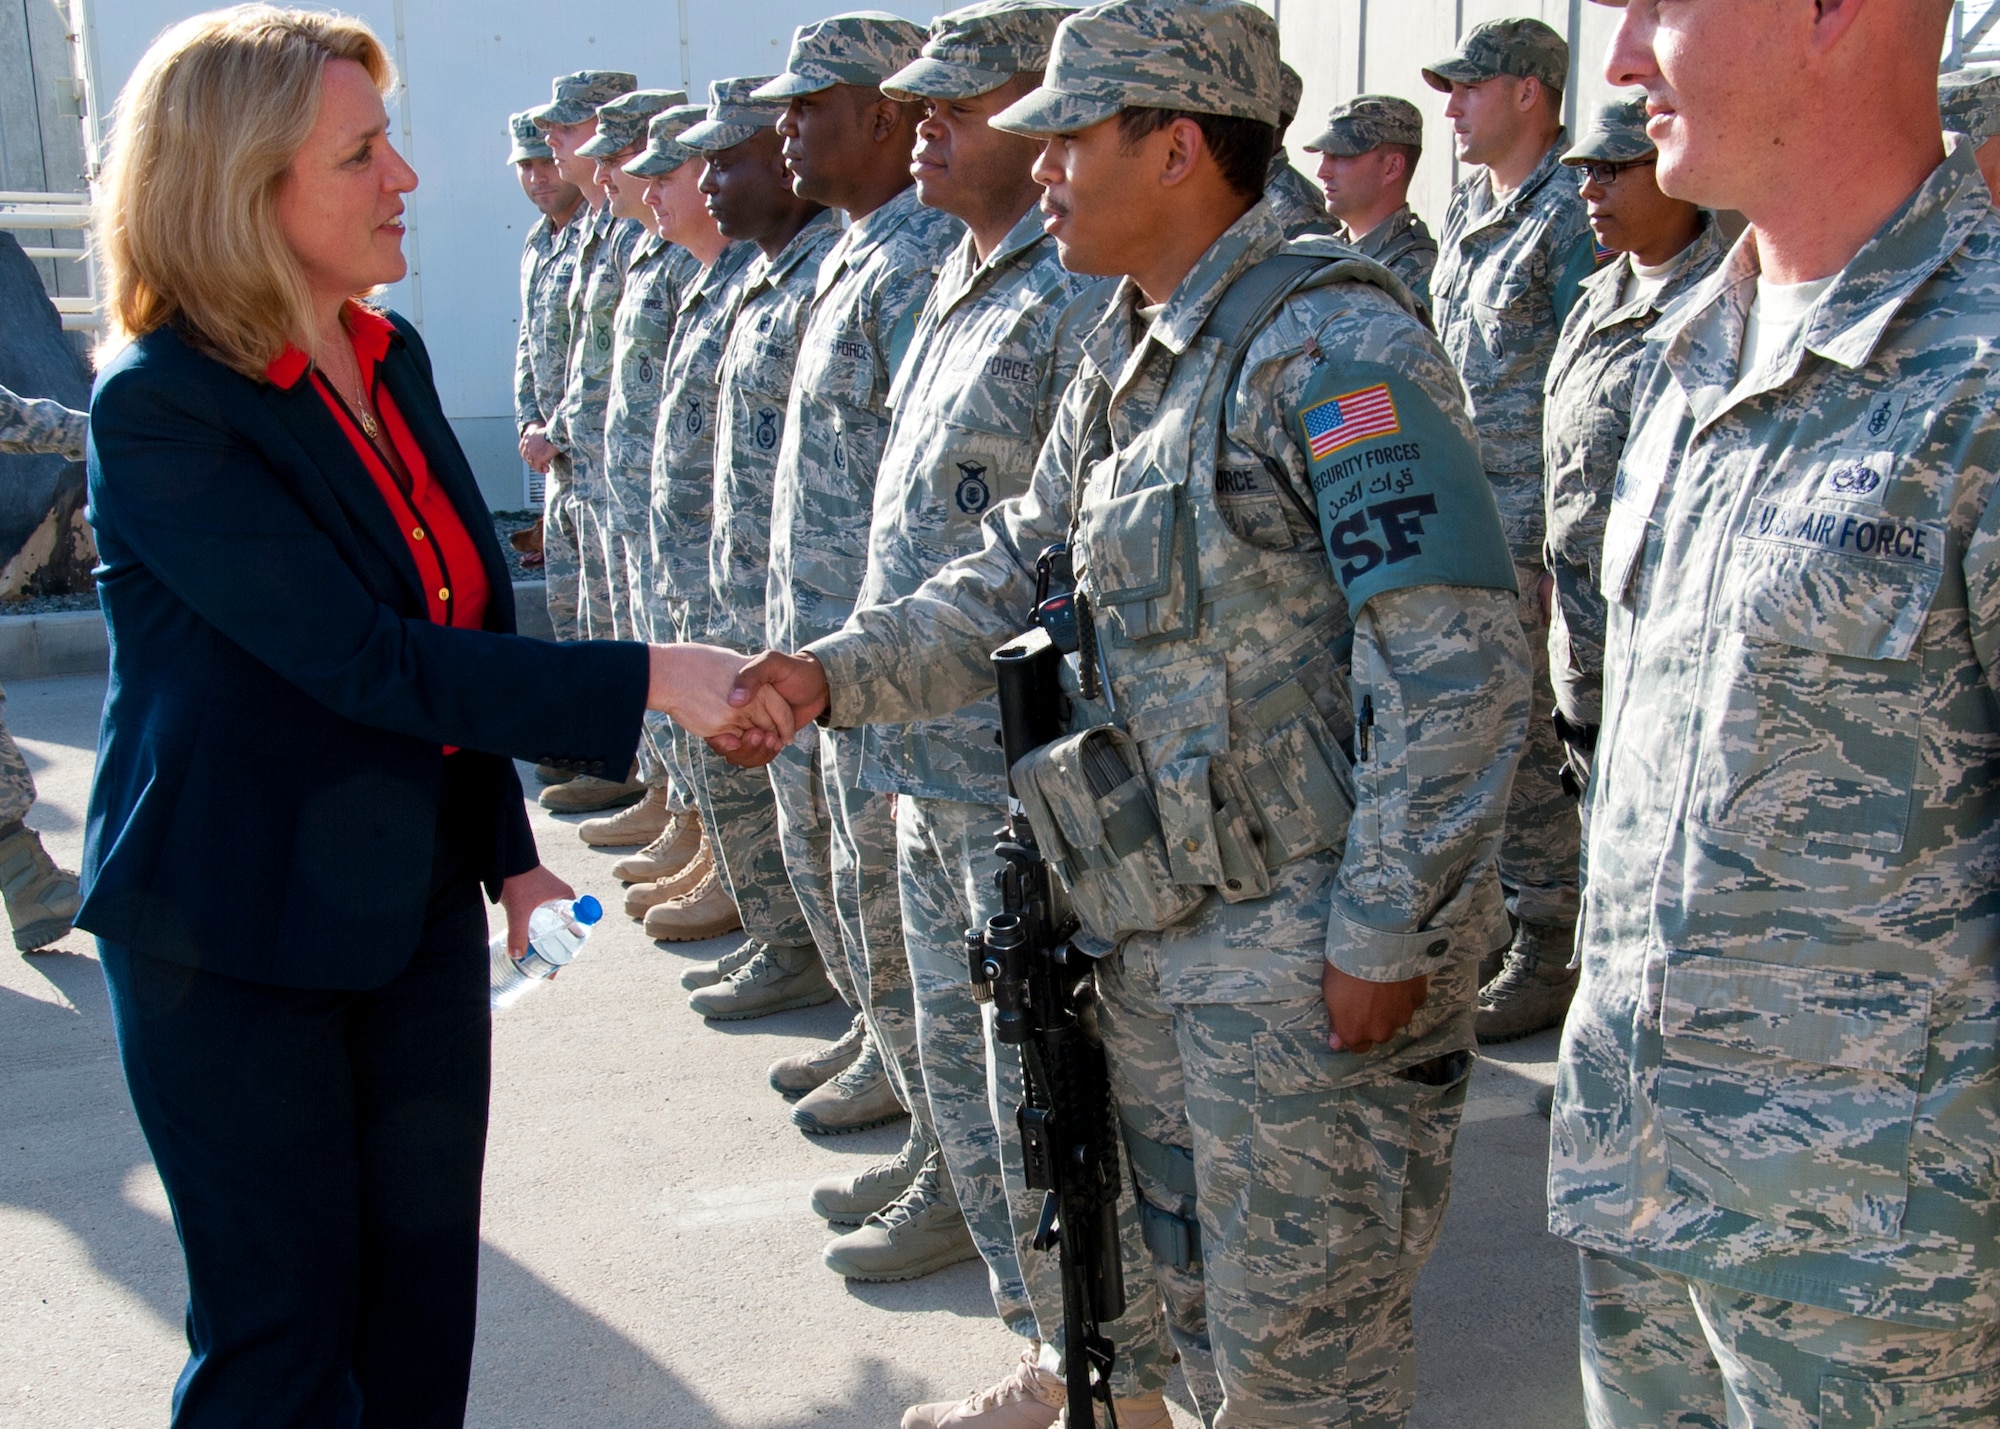 Secretary of the Air Force Deborah Lee James greets Airmen during a walking tour at the 380th Air Expeditionary Wing March 19, 2014, at an undisclosed location in Southwest Asia. During her visit James held an all call, speaking on three priorities: Taking care of people, balancing today's readiness with tomorrow's readiness and making every dollar count. (U.S. Air Force photo/Staff Sgt. Michael Means) 